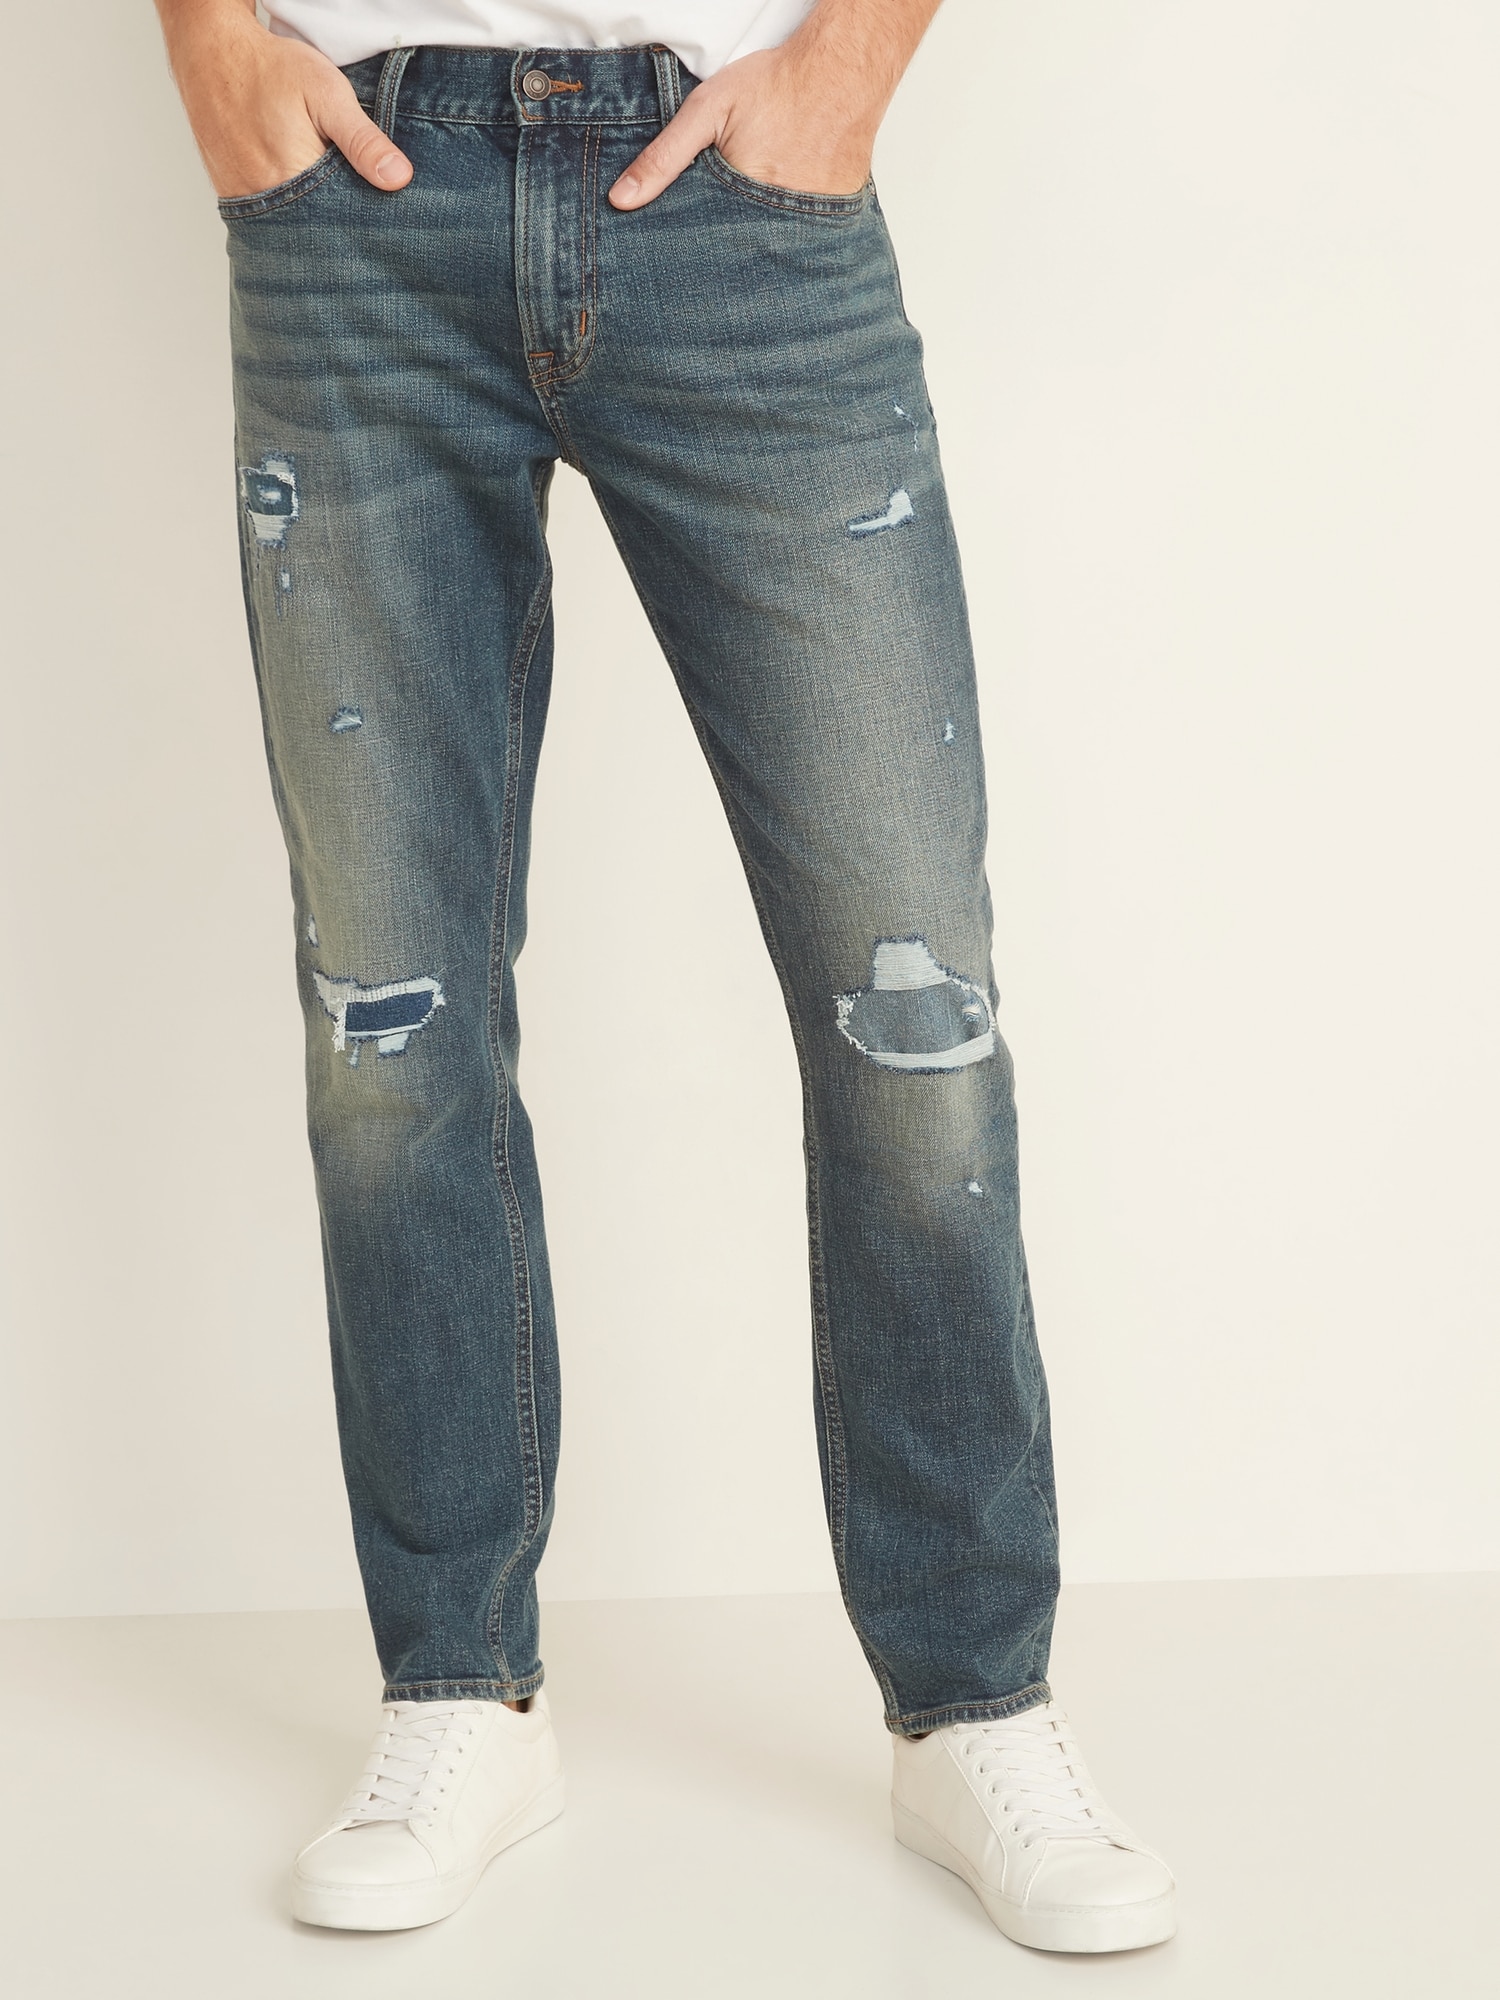 old navy frayed jeans